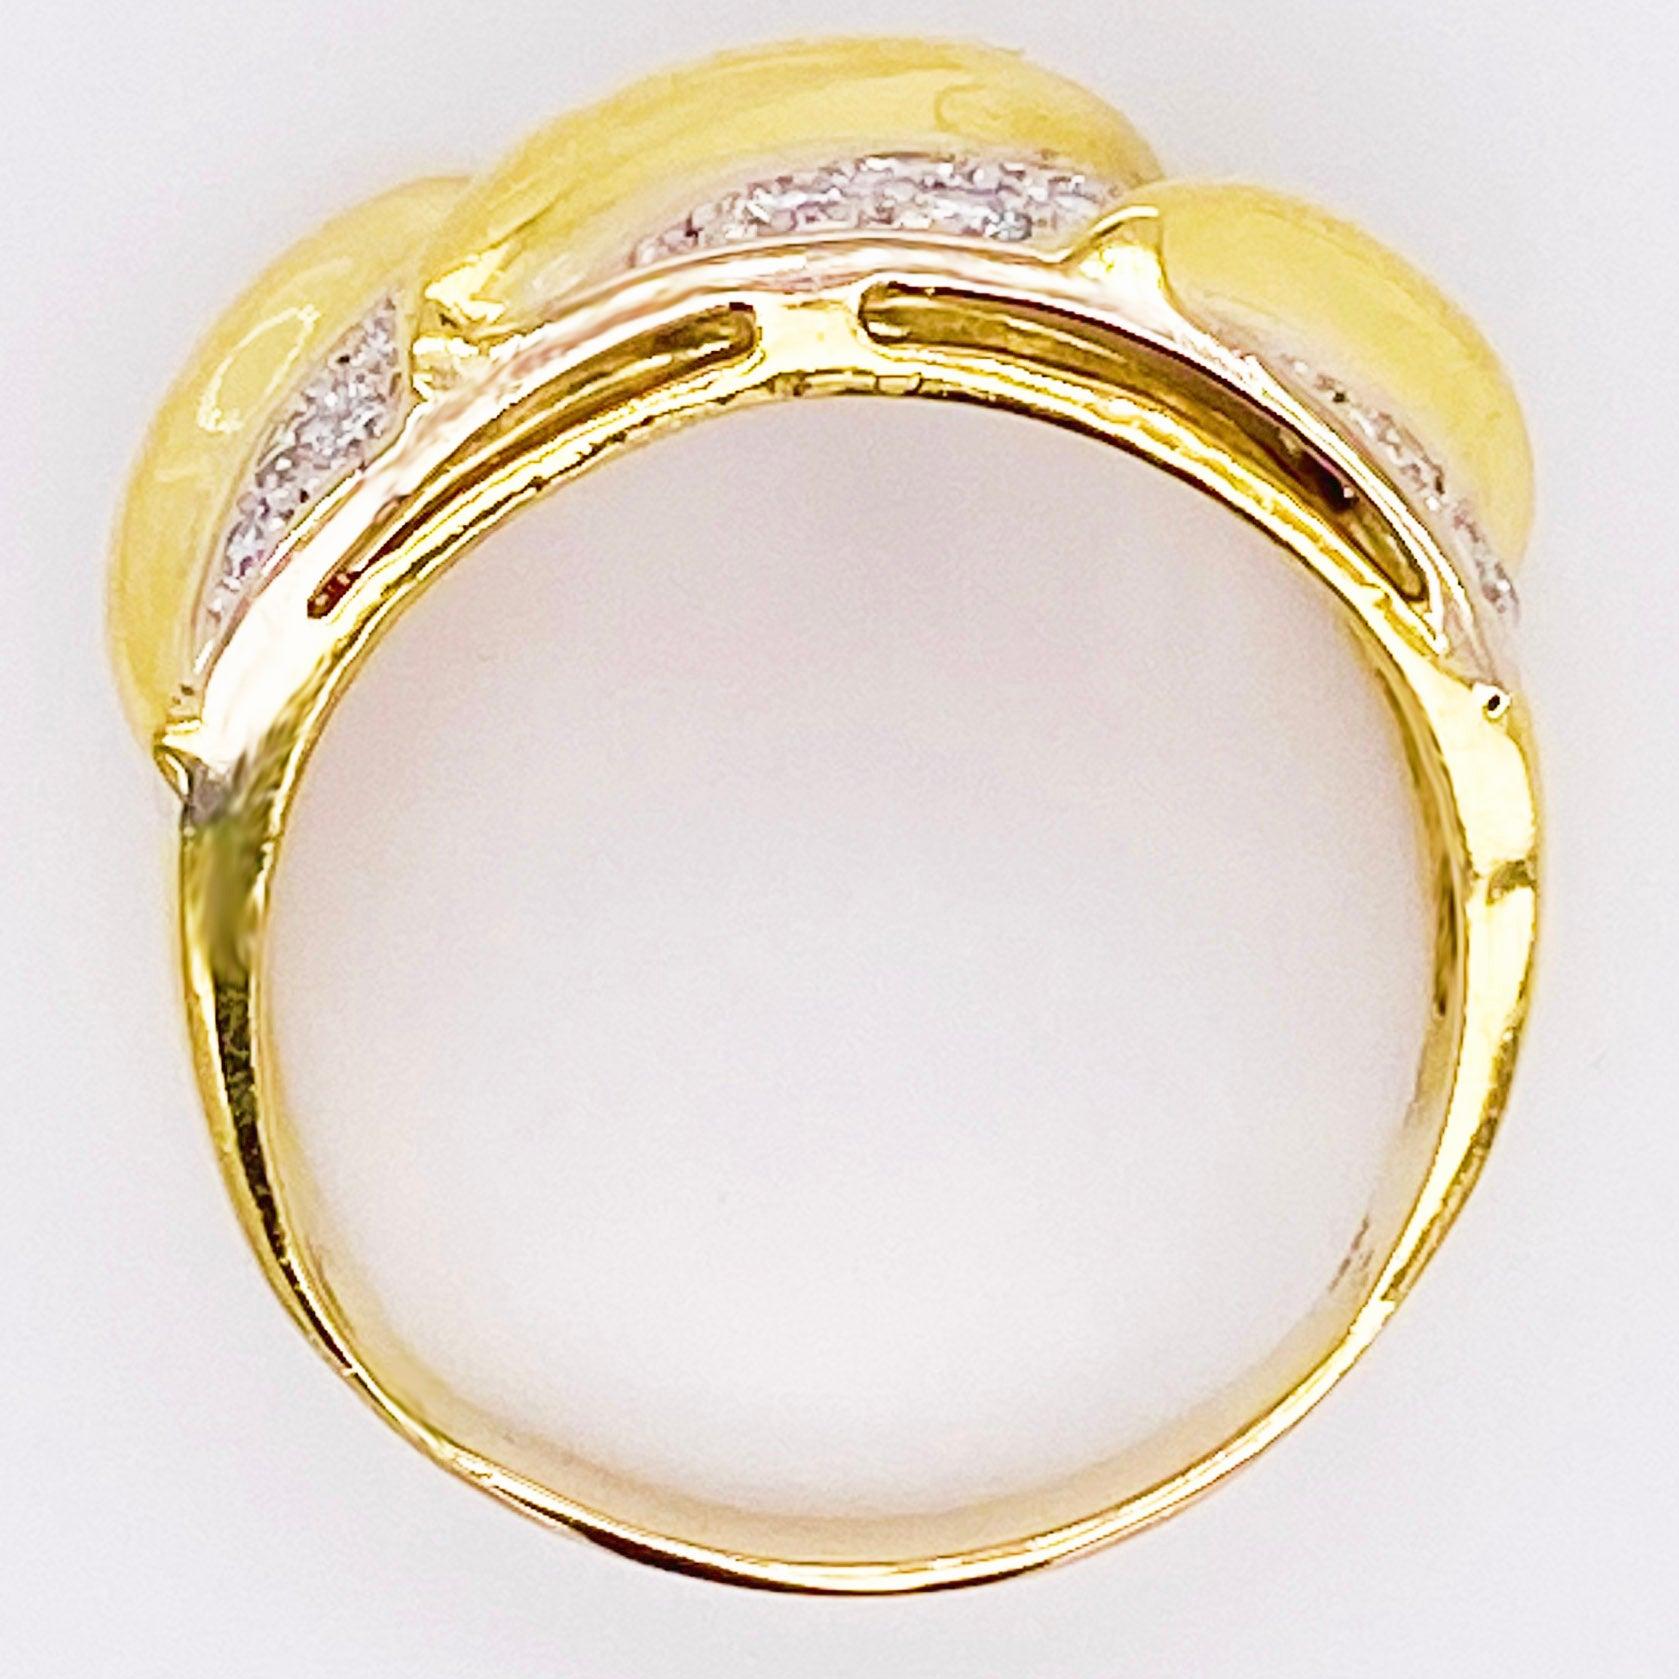 For Sale:  Wide Diamond Band, Yellow Gold, Bombe, Twisted Band, Pave Diamonds 5